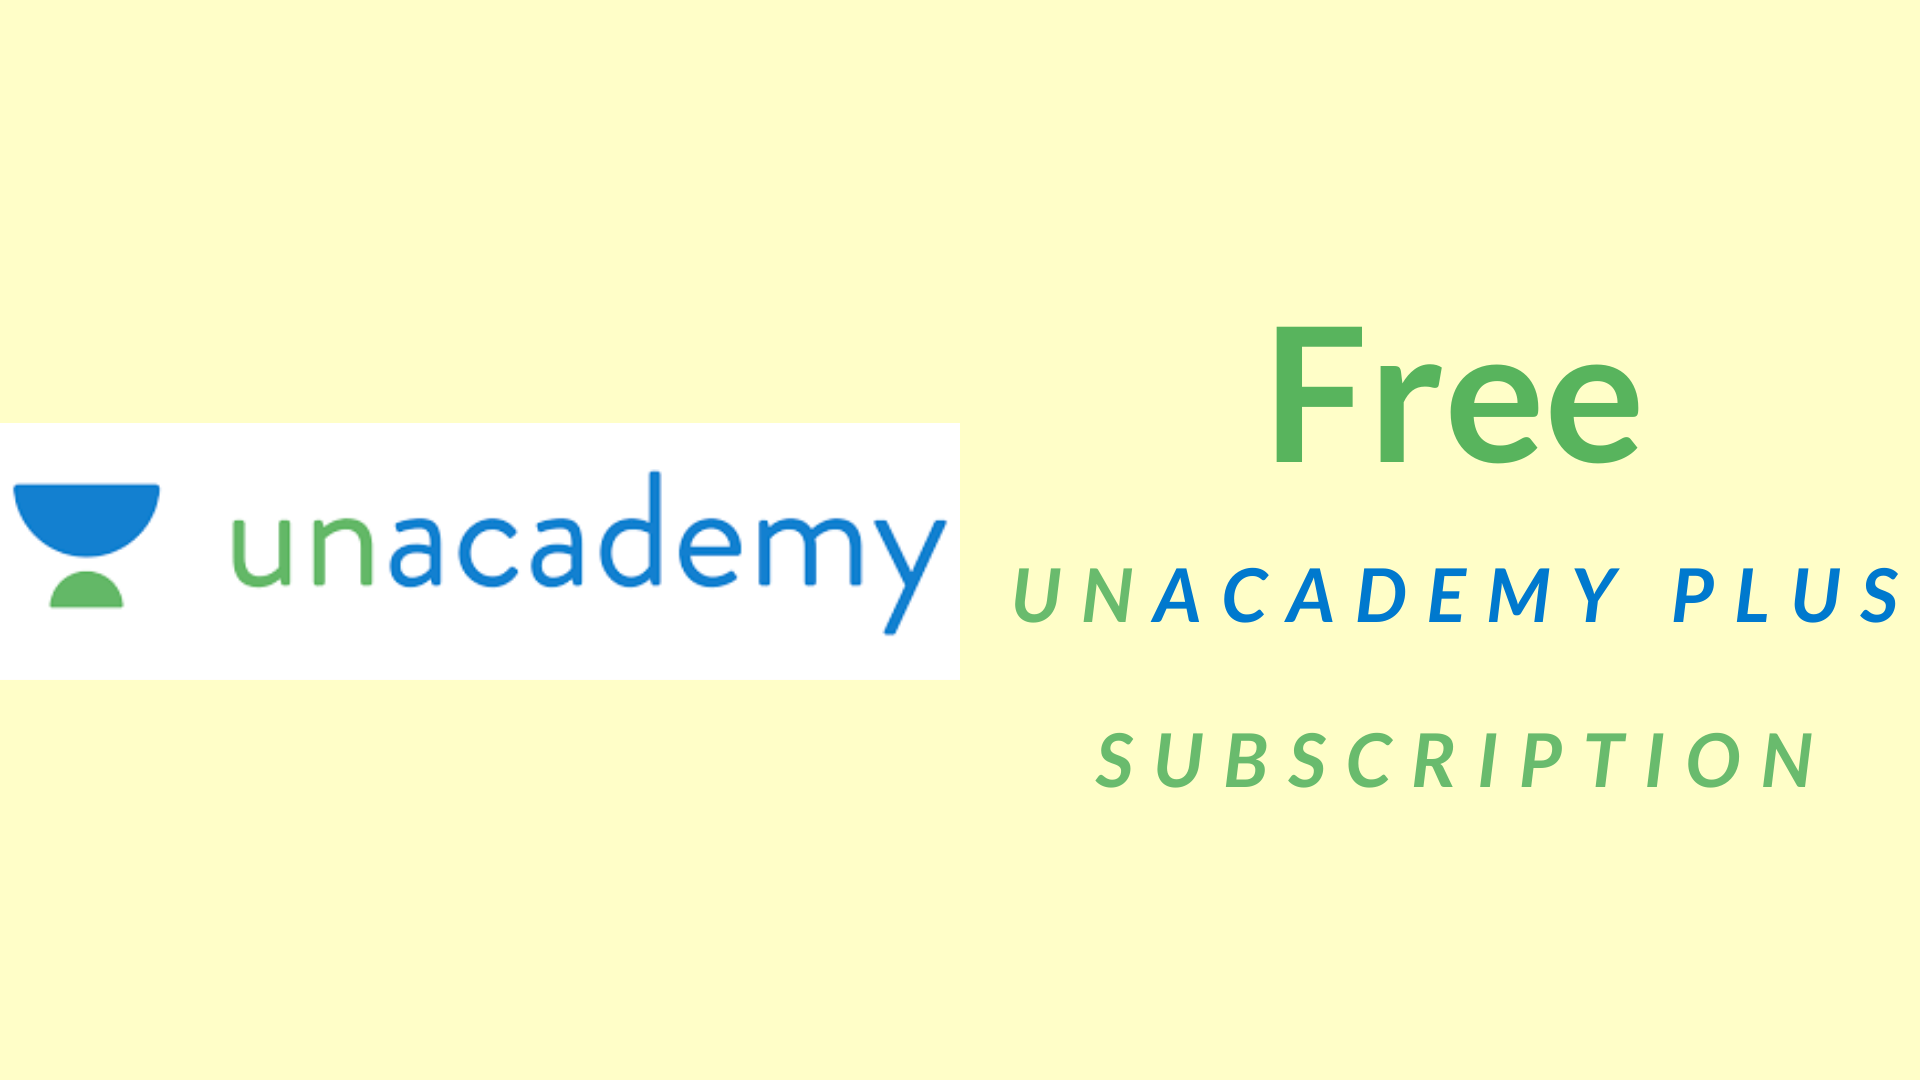 How To Get Unacademy Plus Subscription For Free?